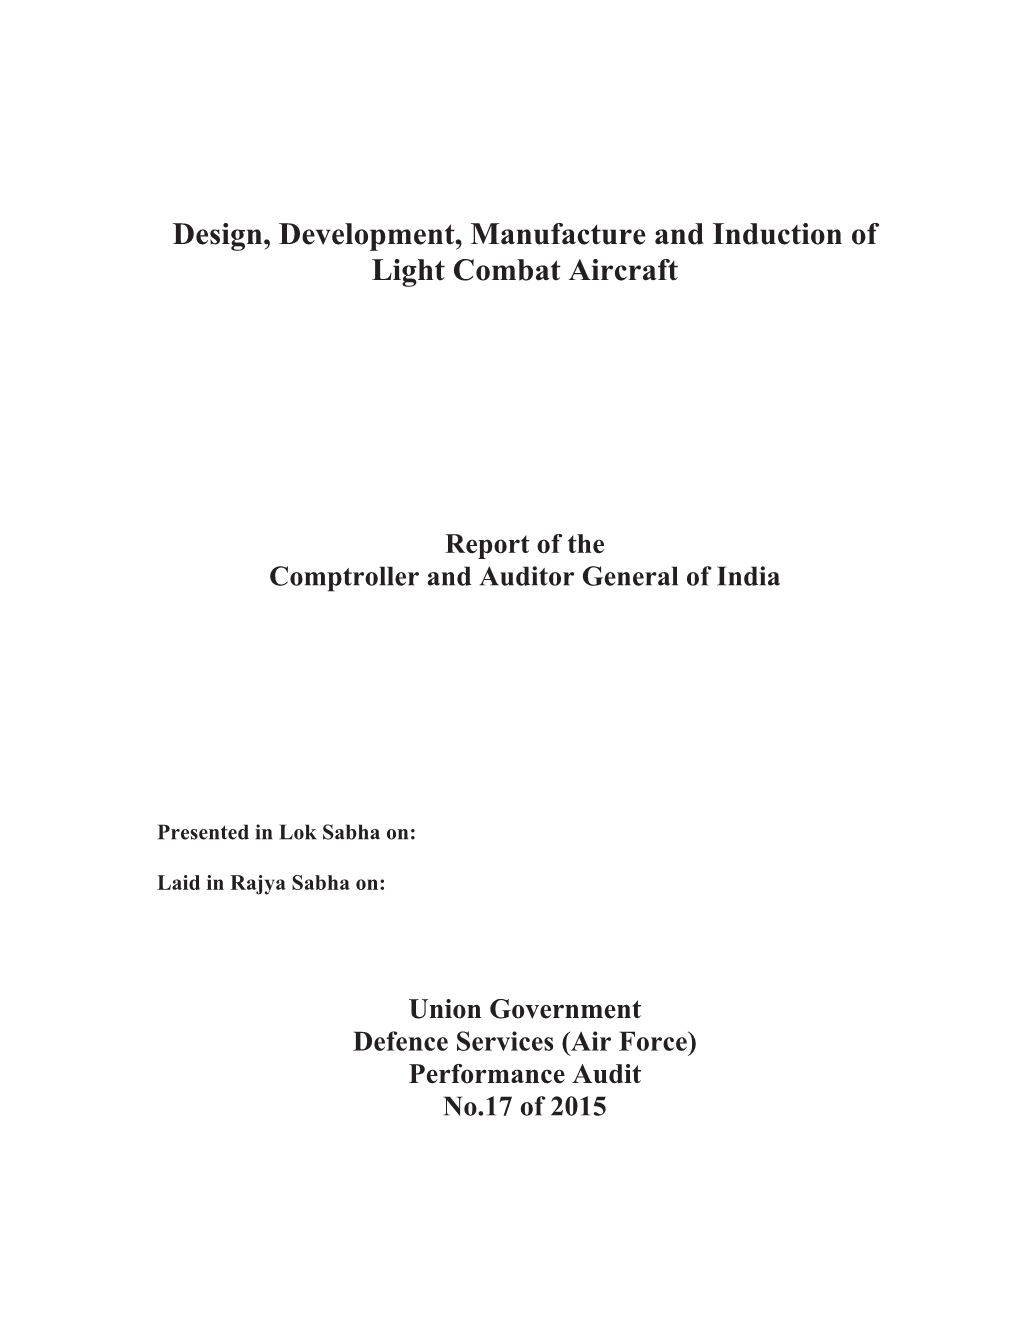 Design, Development, Manufacture and Induction of Light Combat Aircraft